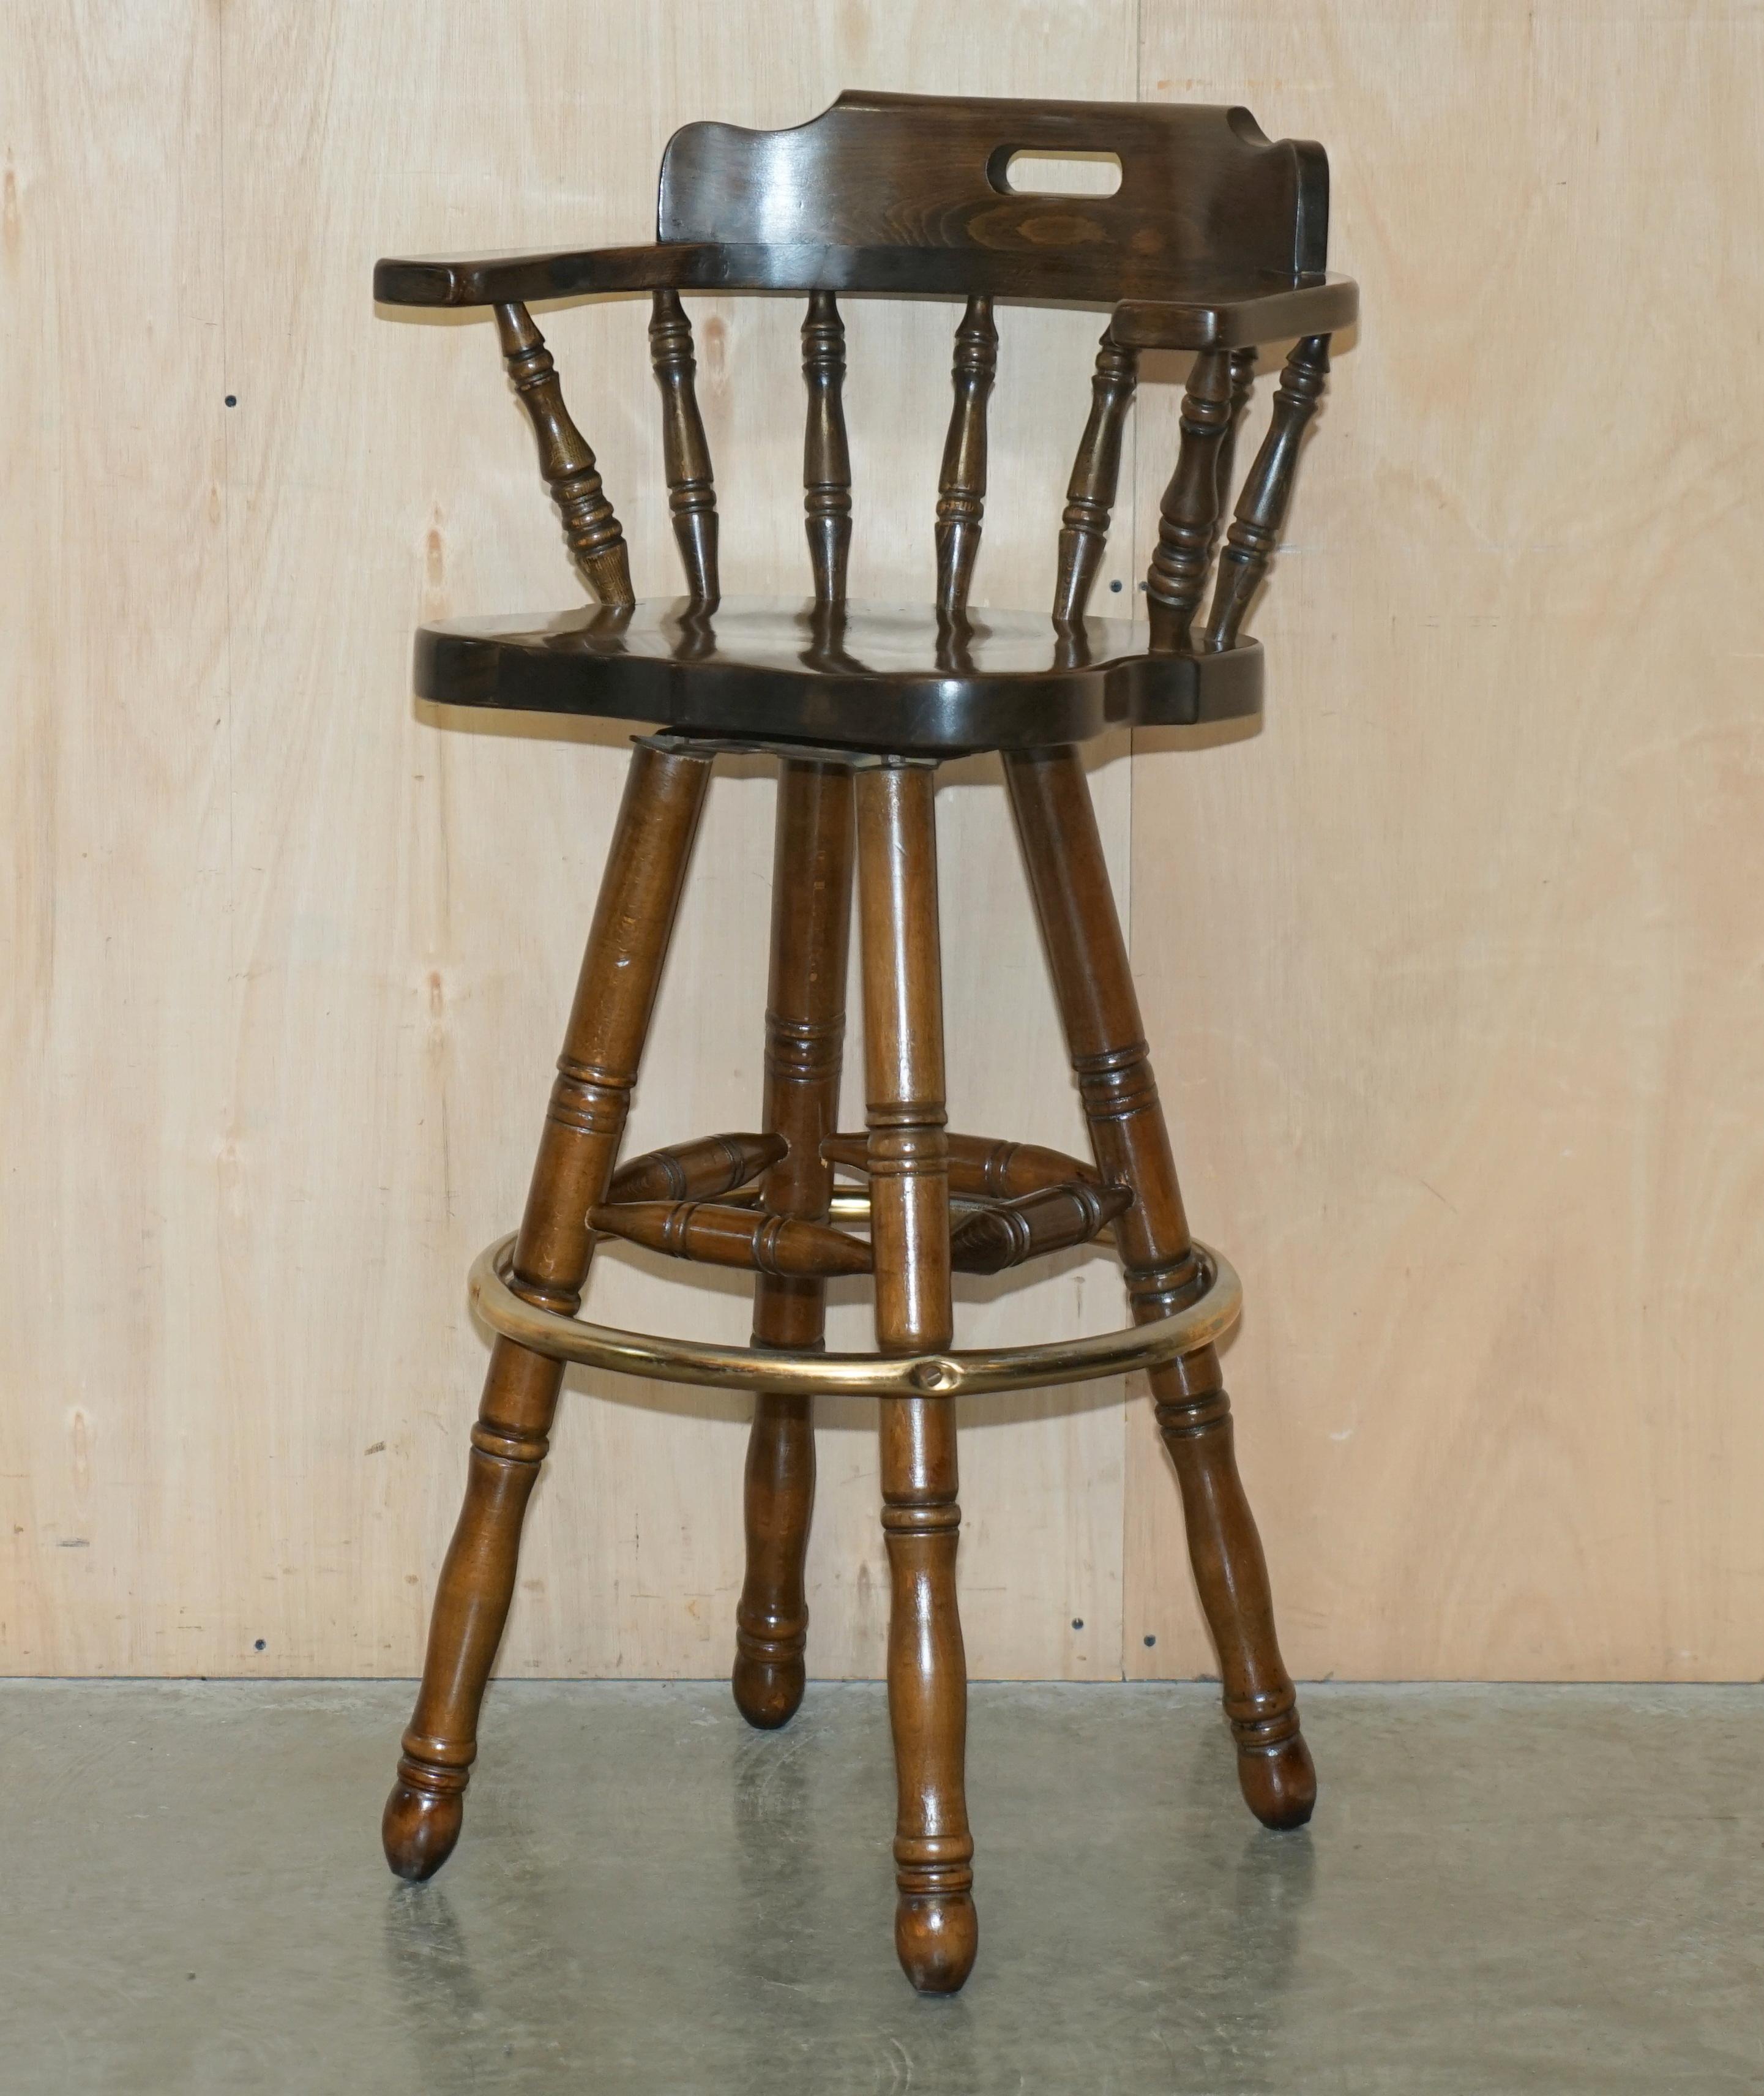 We are delighted to offer for sale this stunning pair of vintage Captains swivel bar stool kitchen armchairs 

Theses are a very good looking and really quite comfortable pair, the timber grain and patina is quite decorative and they have